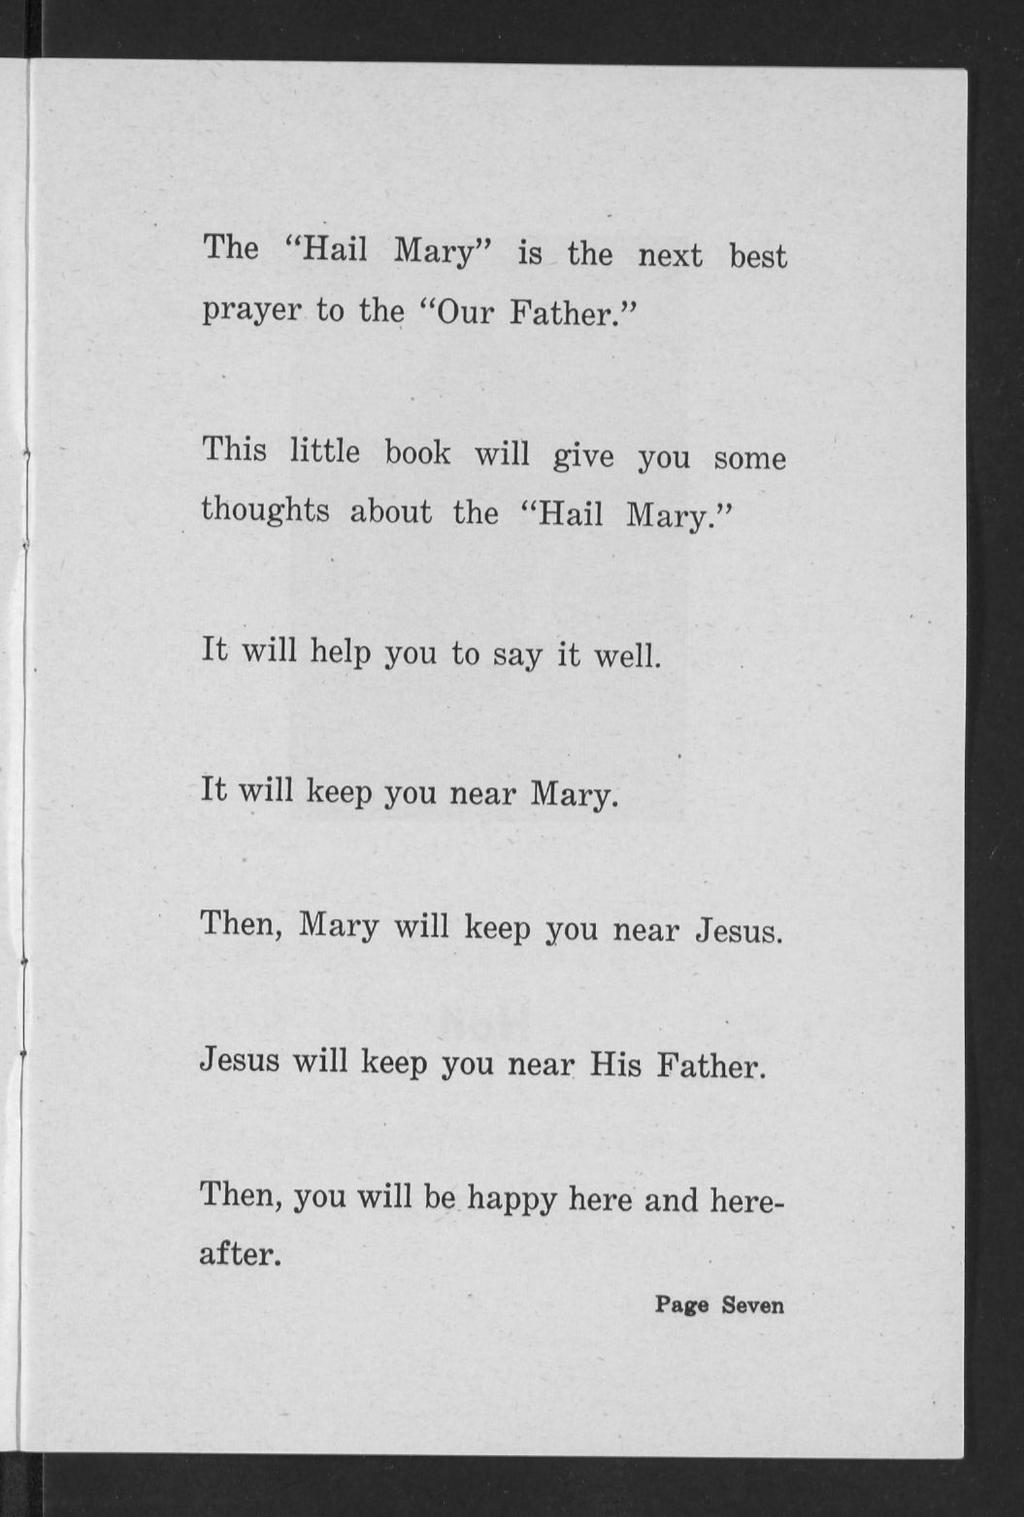 The "Hail Mary" is the next best prayer to the "Our Father." This little book will give you some thoughts about the "Hail Mary.